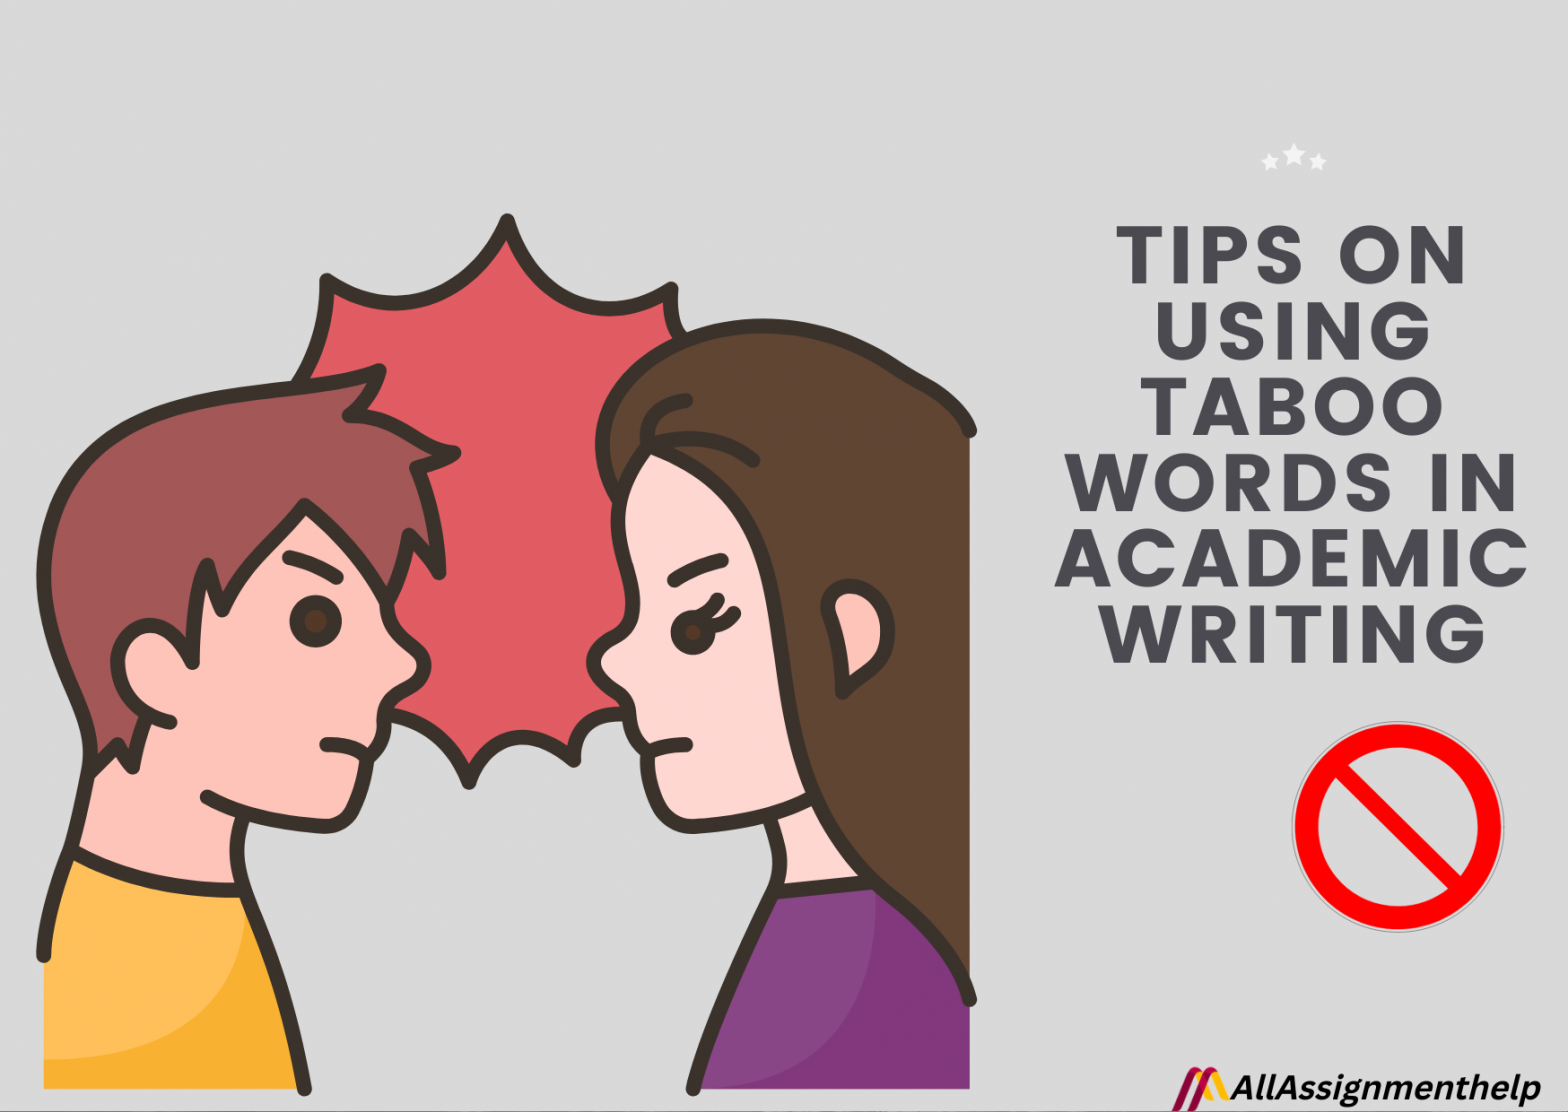 Tips On Using Taboo Words In Academic Writing